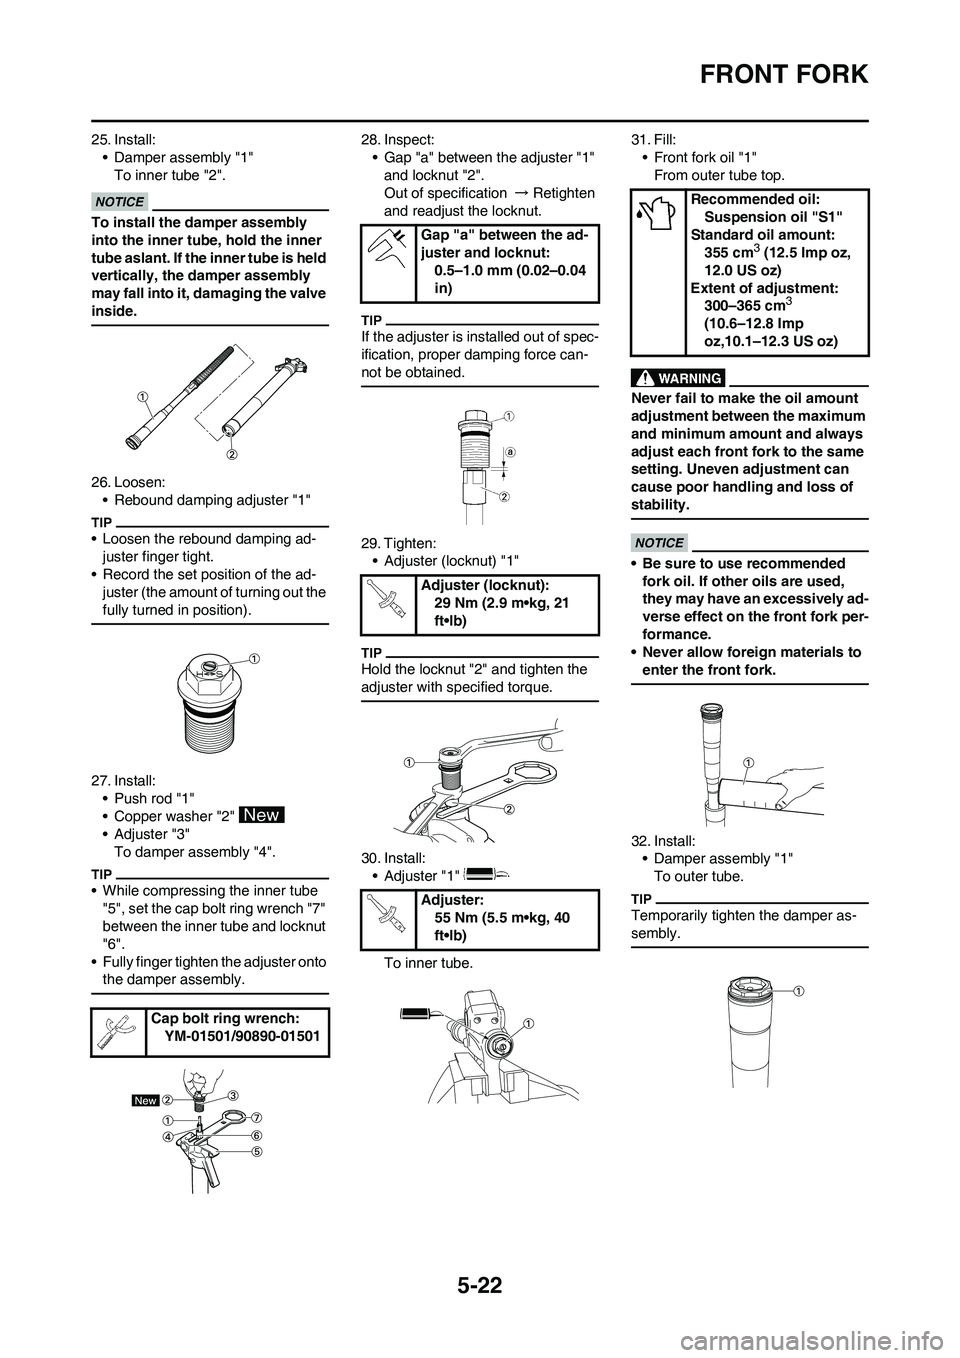 YAMAHA YZ450F 2011  Owners Manual 5-22
FRONT FORK
25. Install:
• Damper assembly "1"
To inner tube "2".
To install the damper assembly 
into the inner tube, hold the inner 
tube aslant. If the inner tube is held 
vertically, the dam